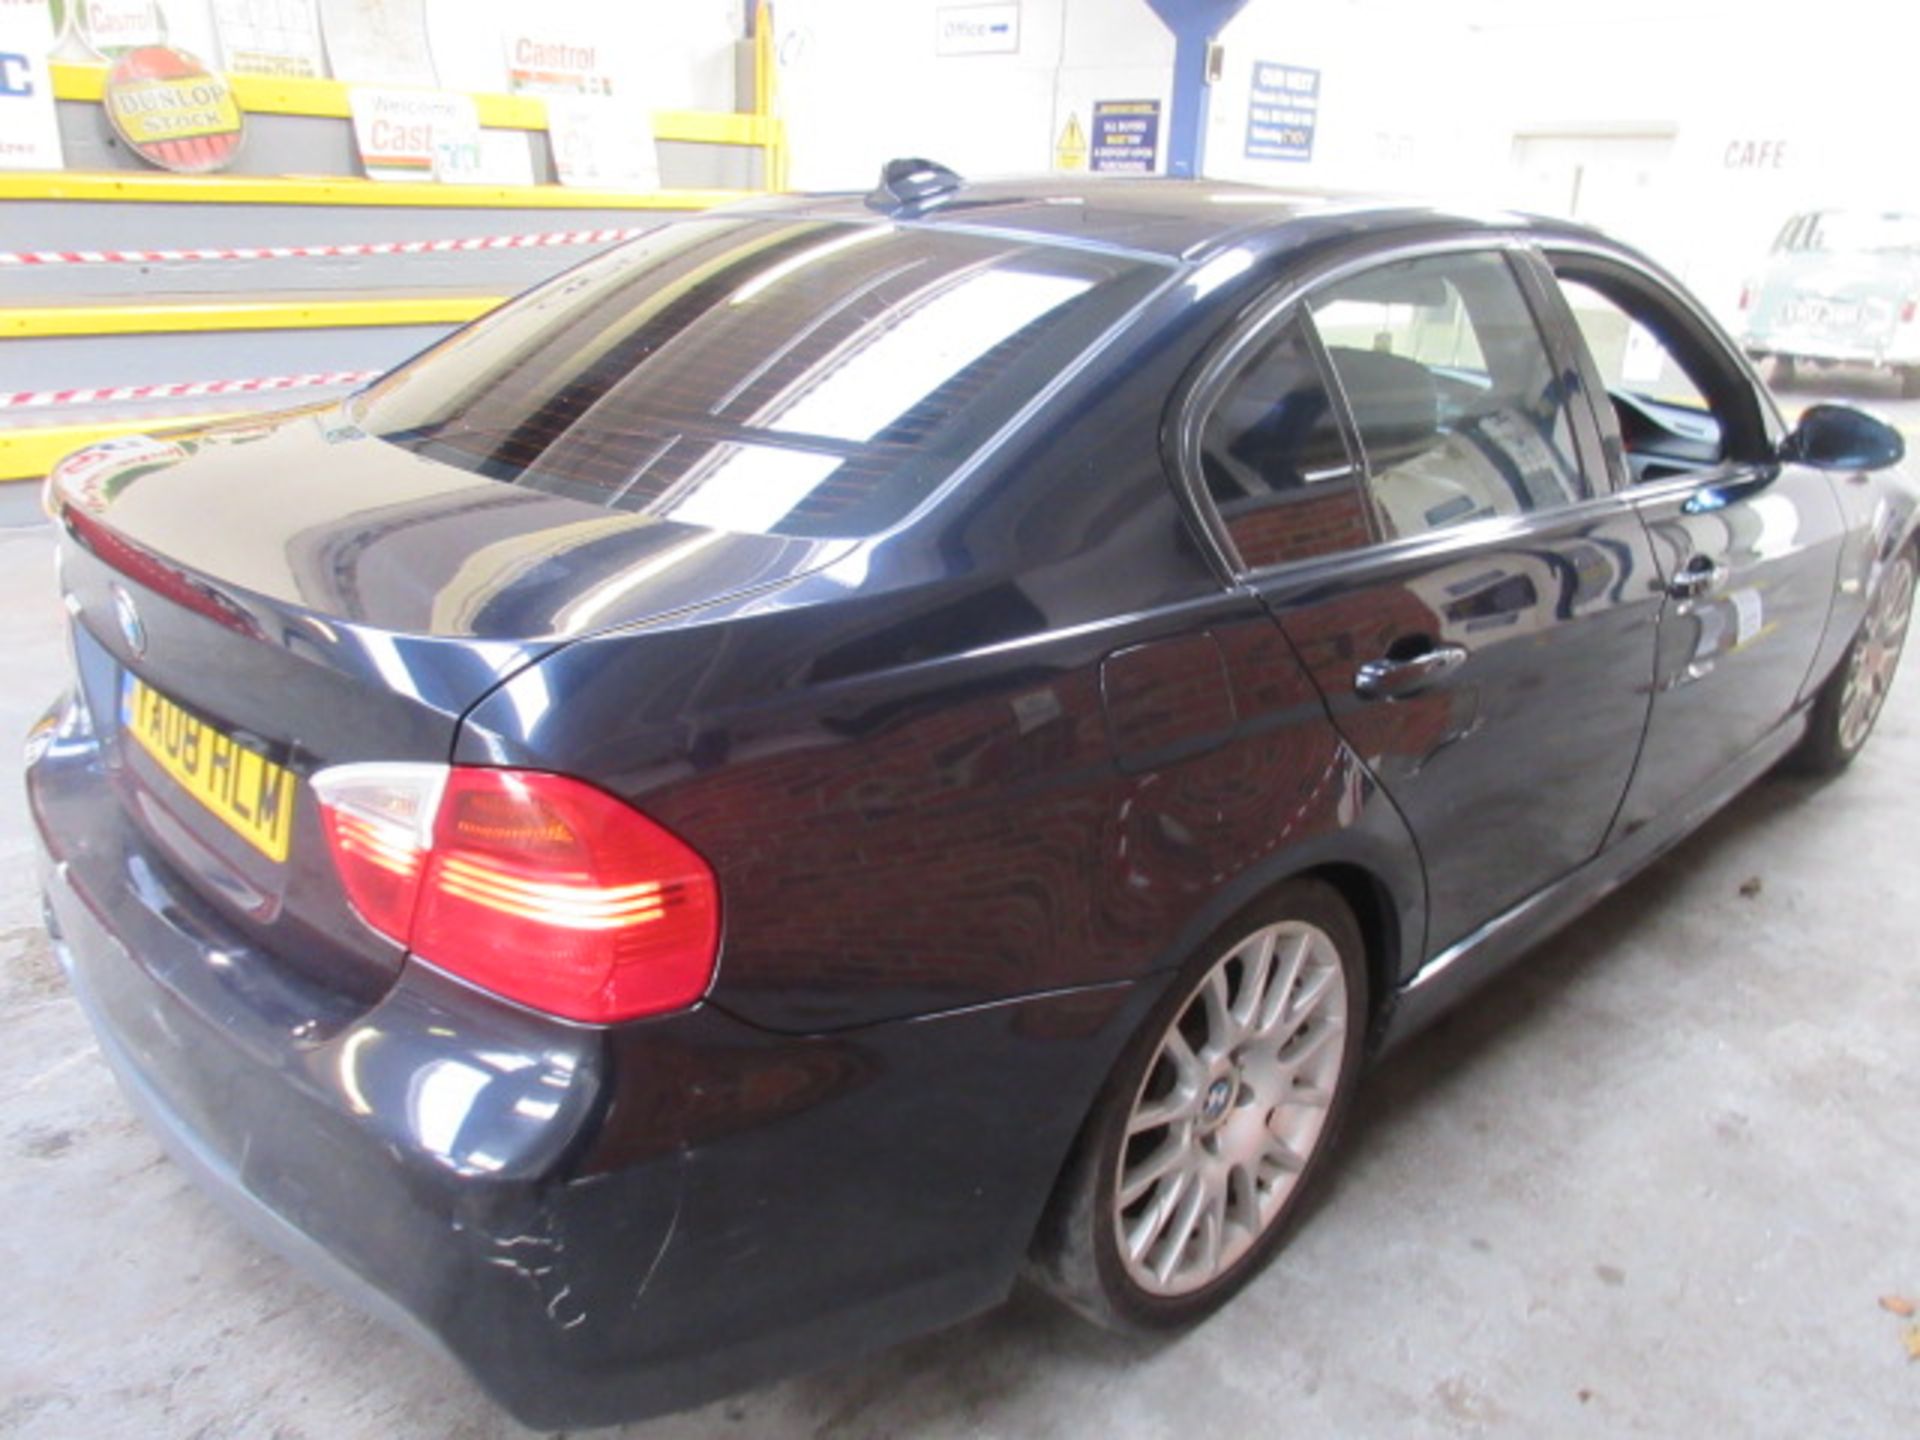 08 08 BMW 320D Edition M Sport - Image 2 of 11